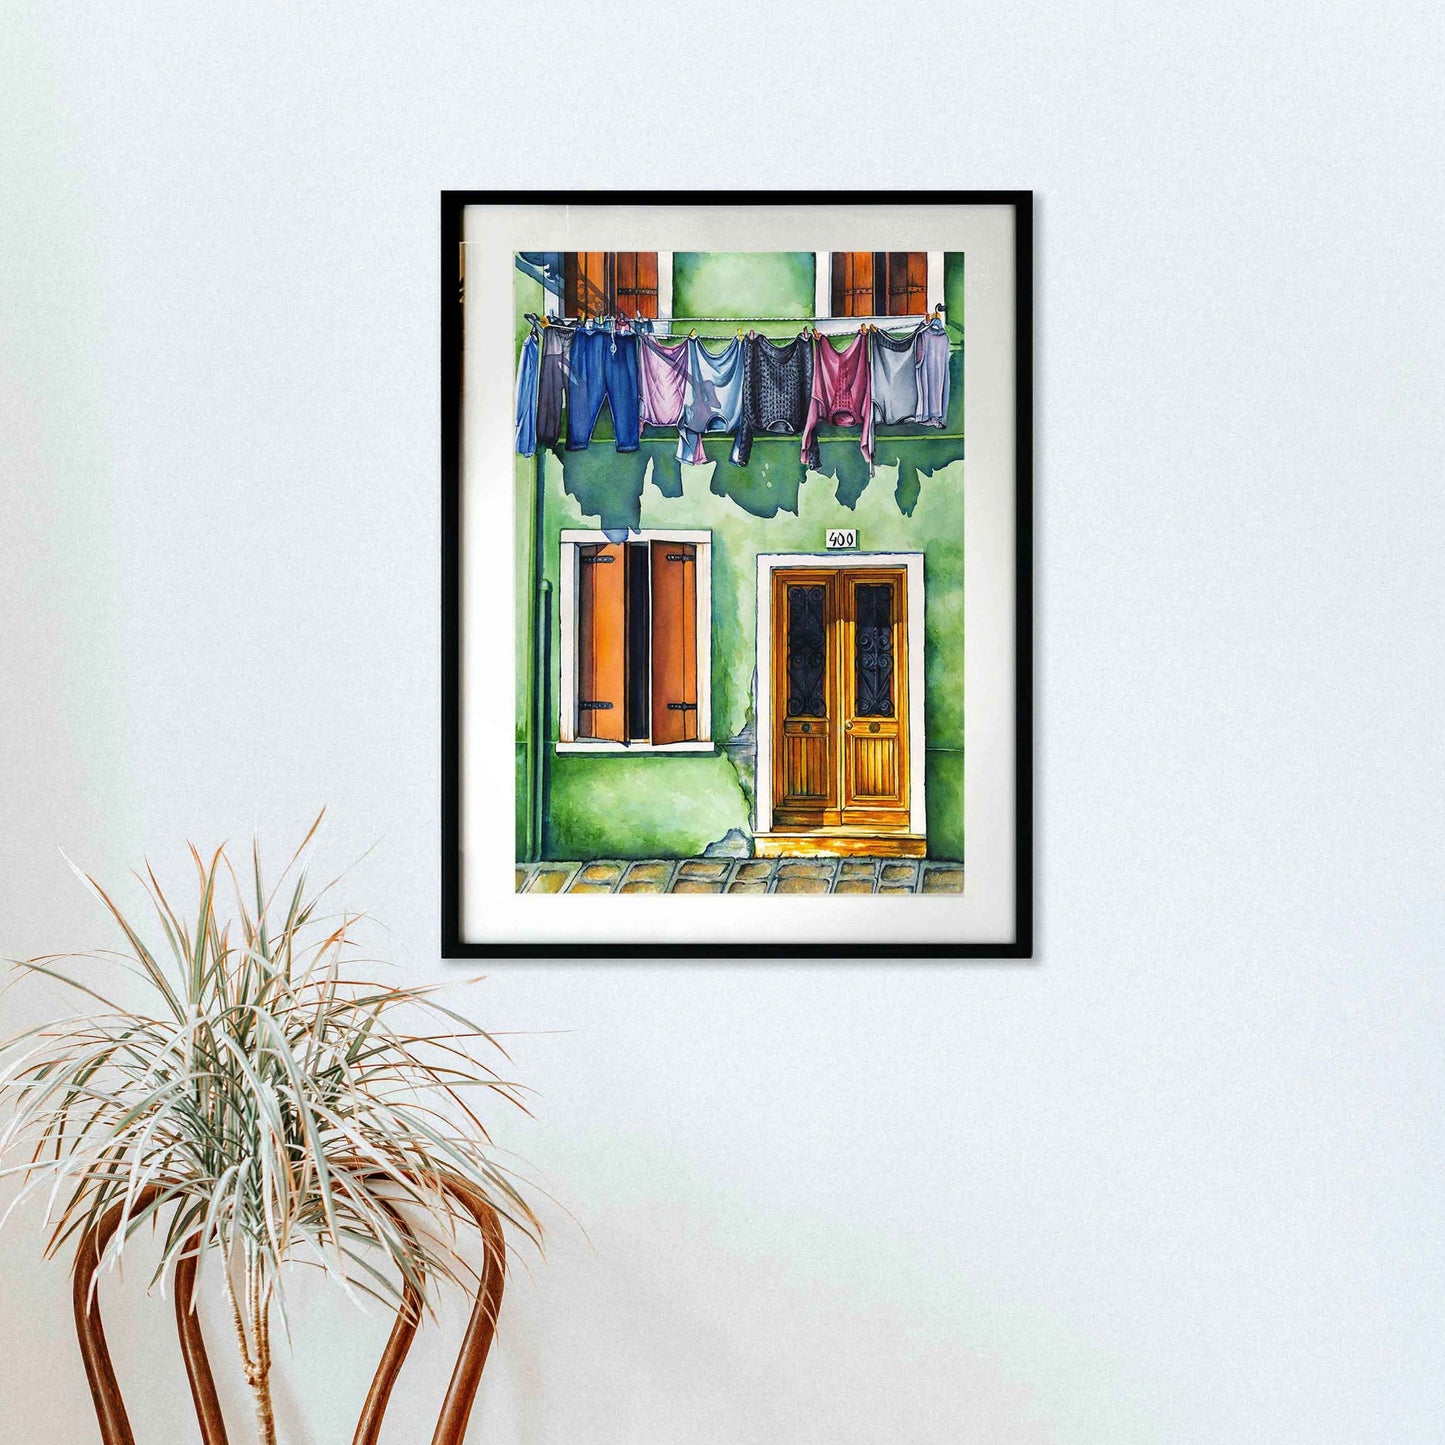 Clothesline on Green House - Giclée Watercolor Print